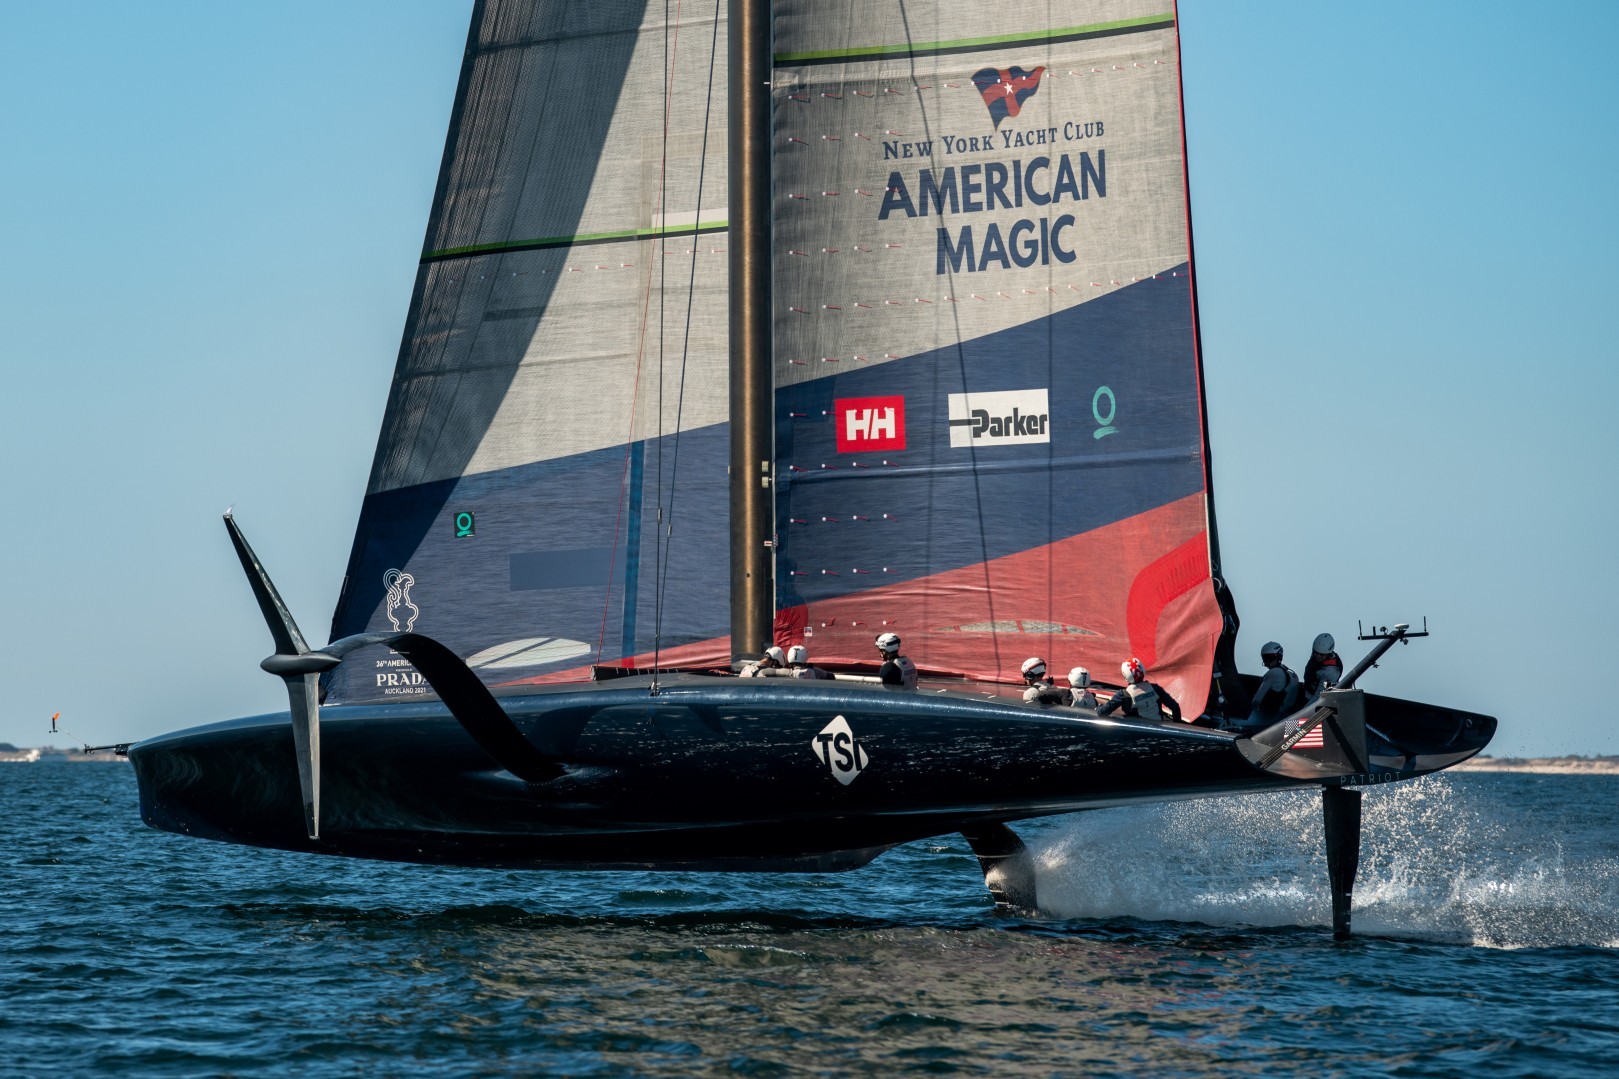 SRAM named official supplier of New York Yacht Club American Magic